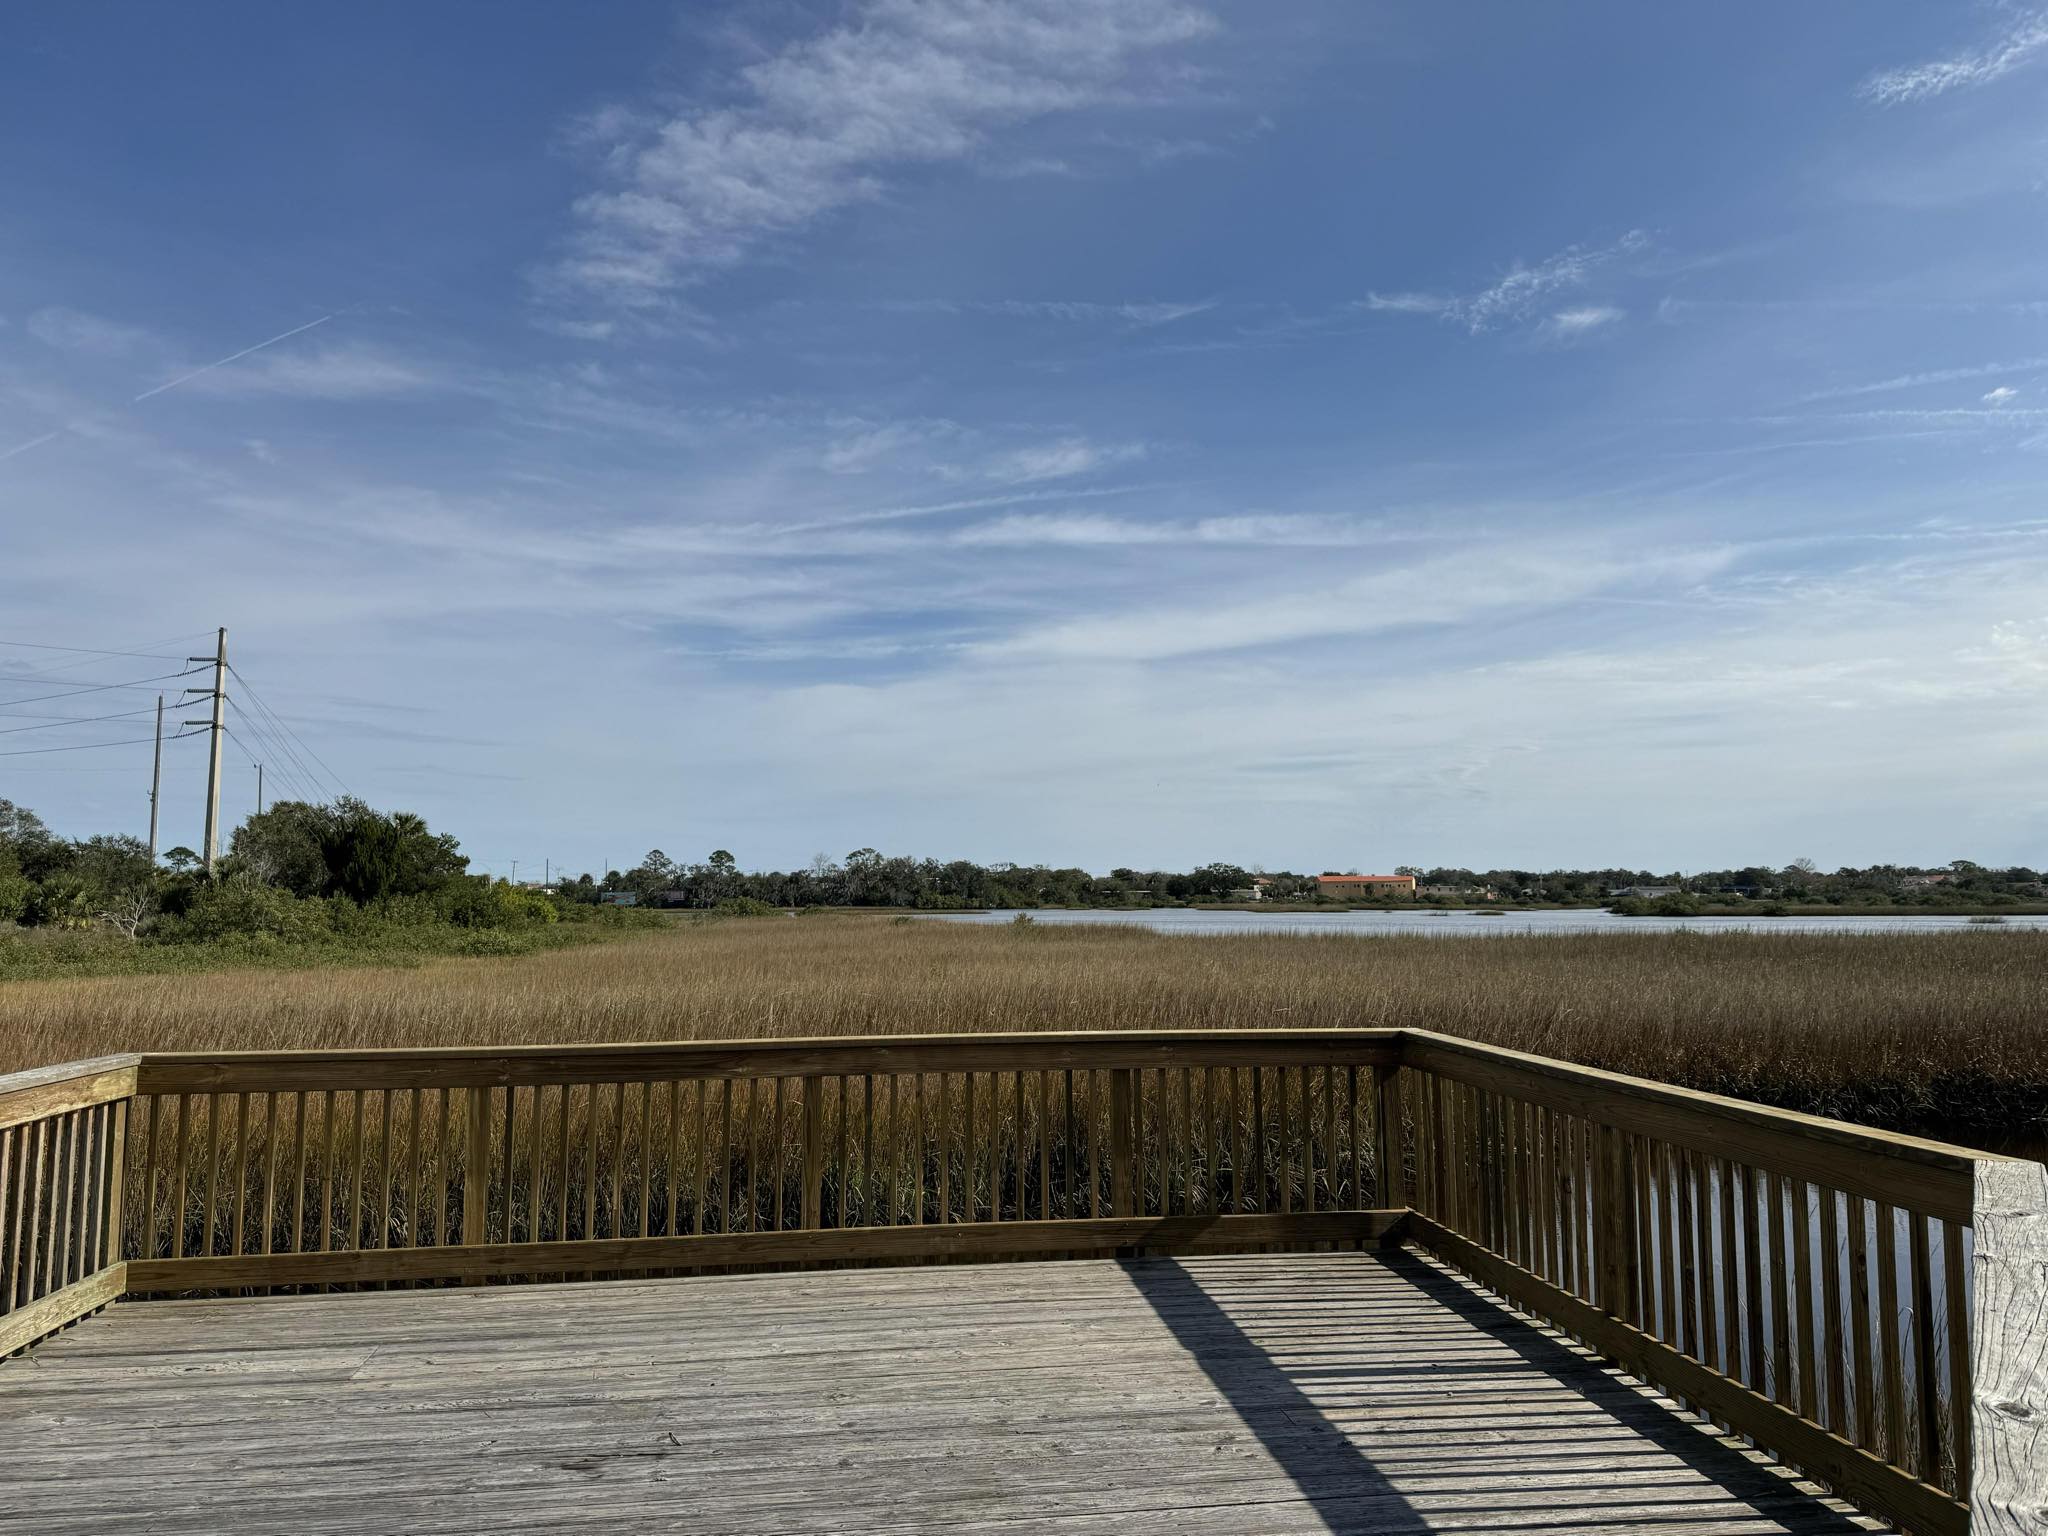 A wooden dock looking out over a marsh.